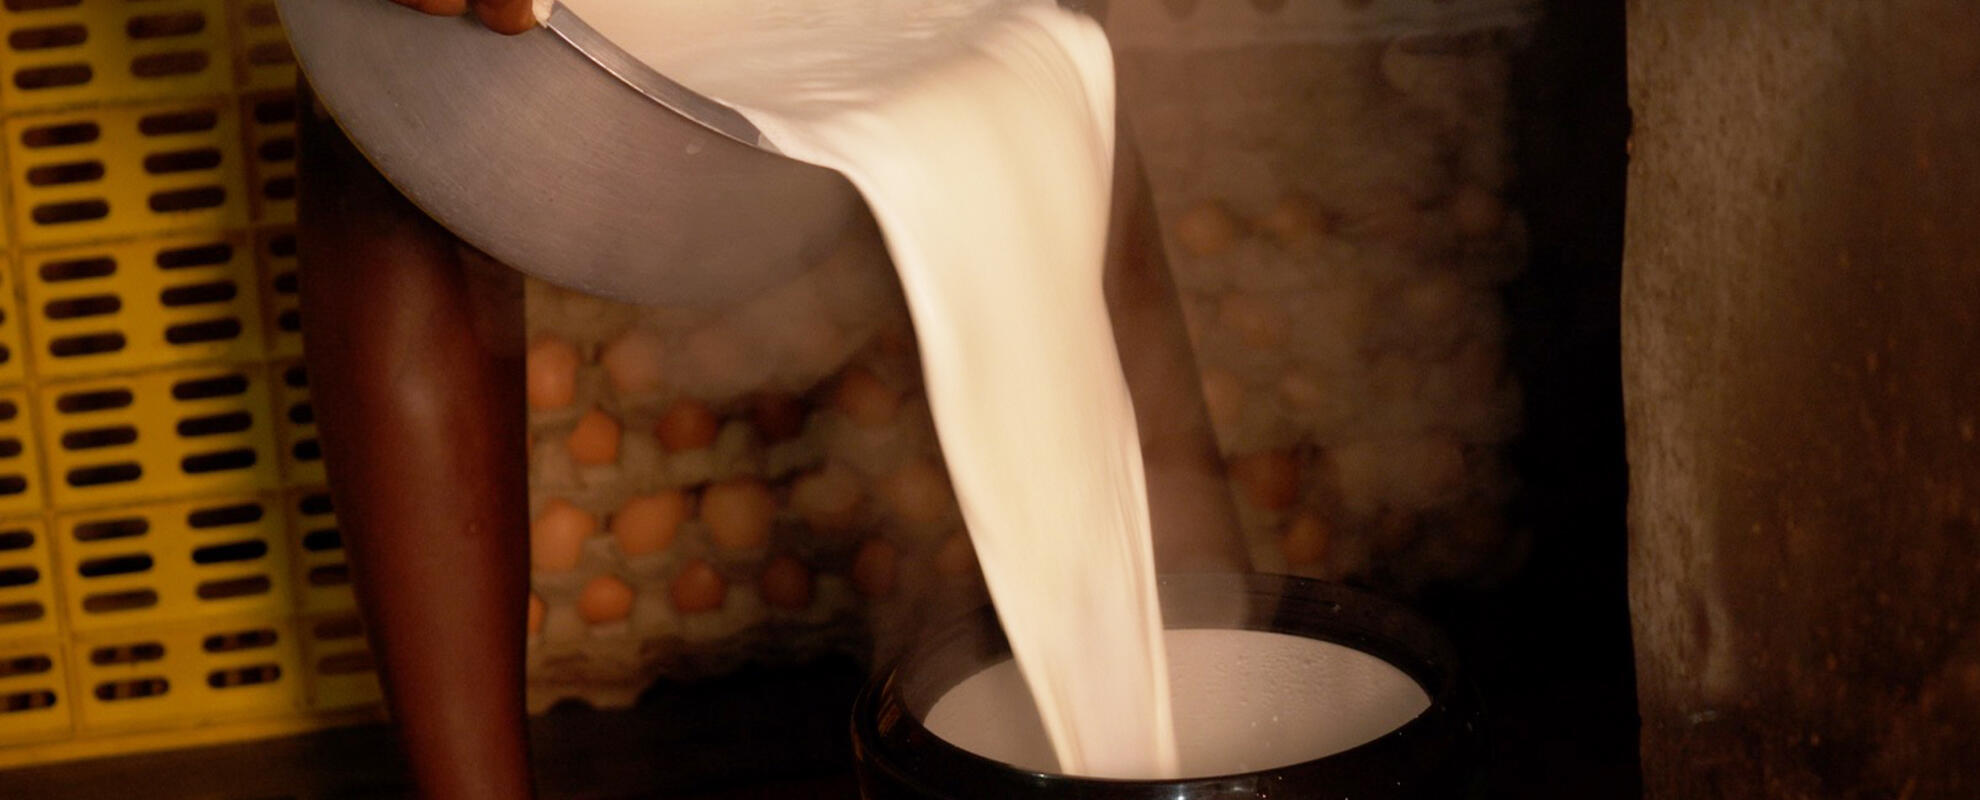 Person pouring boiled milk from a saucepan into a milk container